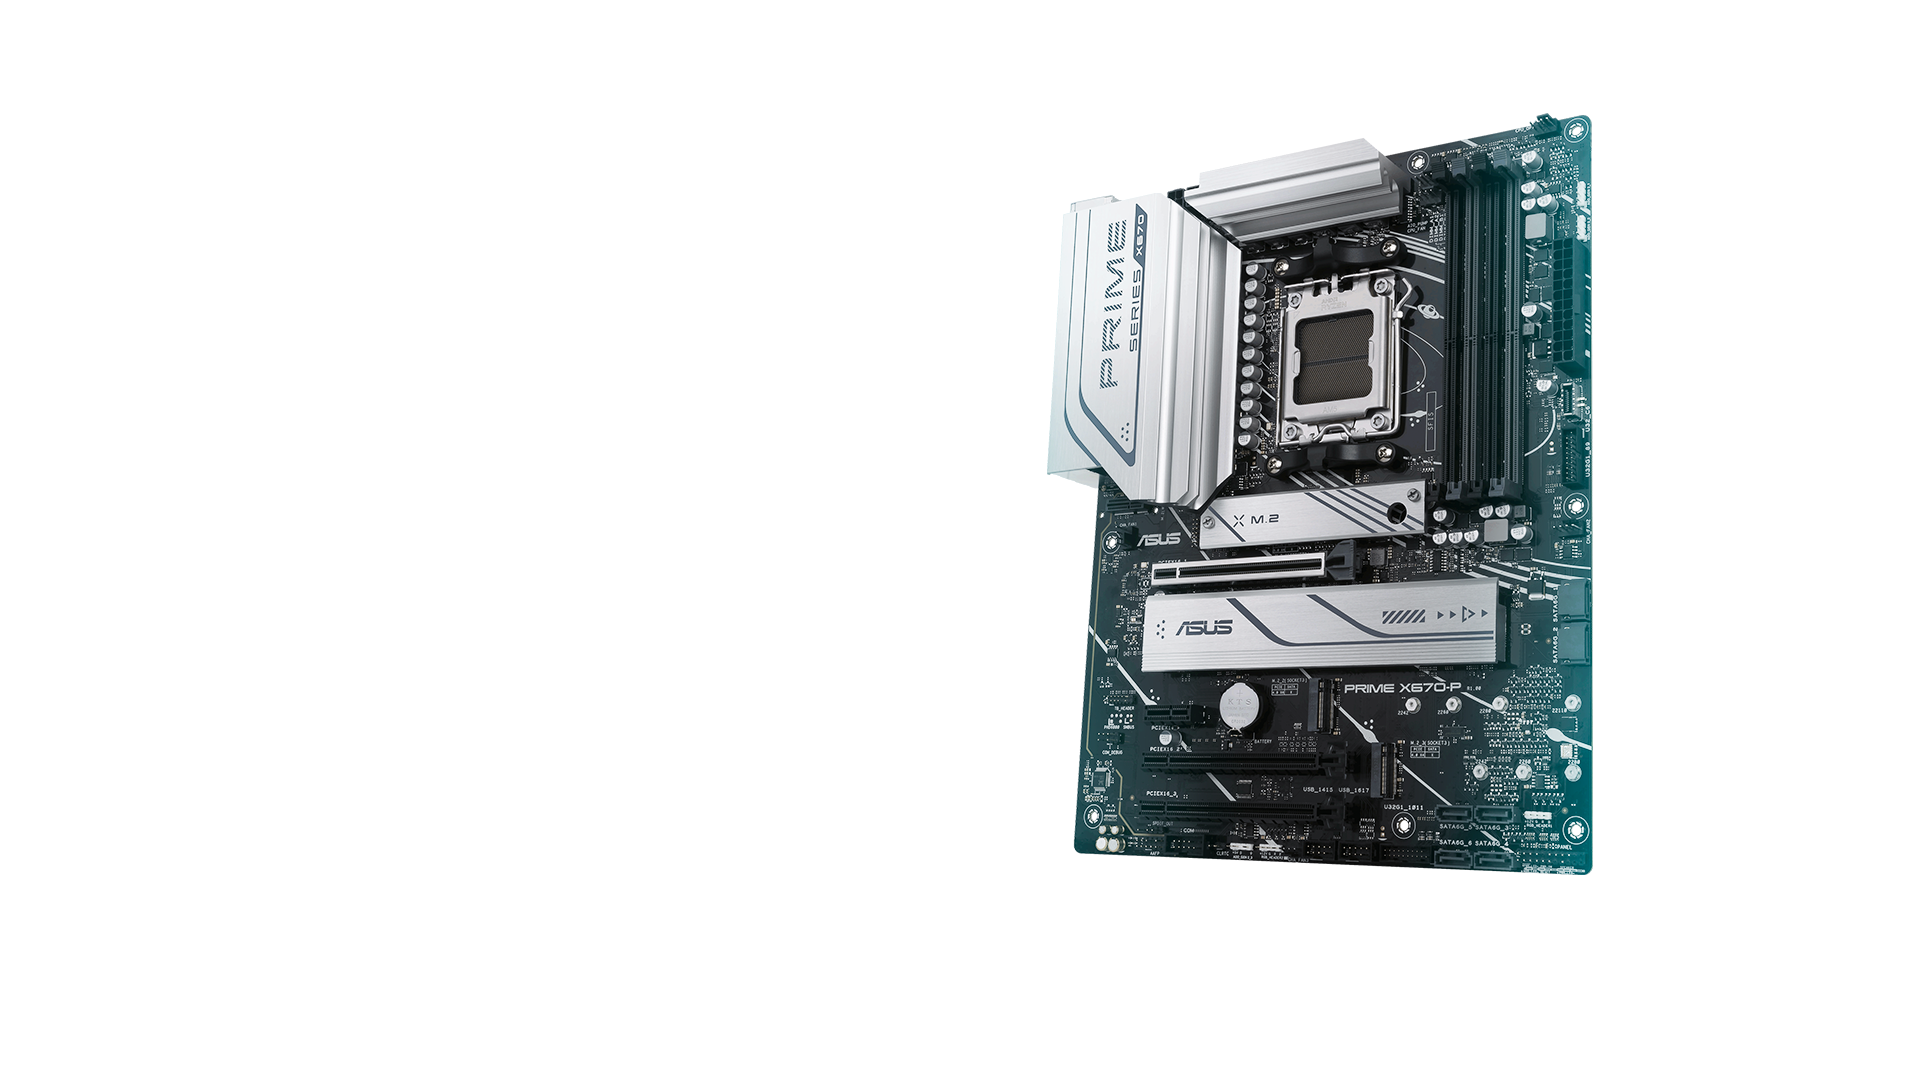 PRIME X670-P-CSM provides users and PC DIY builders a range of performance tuning options via intuitive software and firmware features.